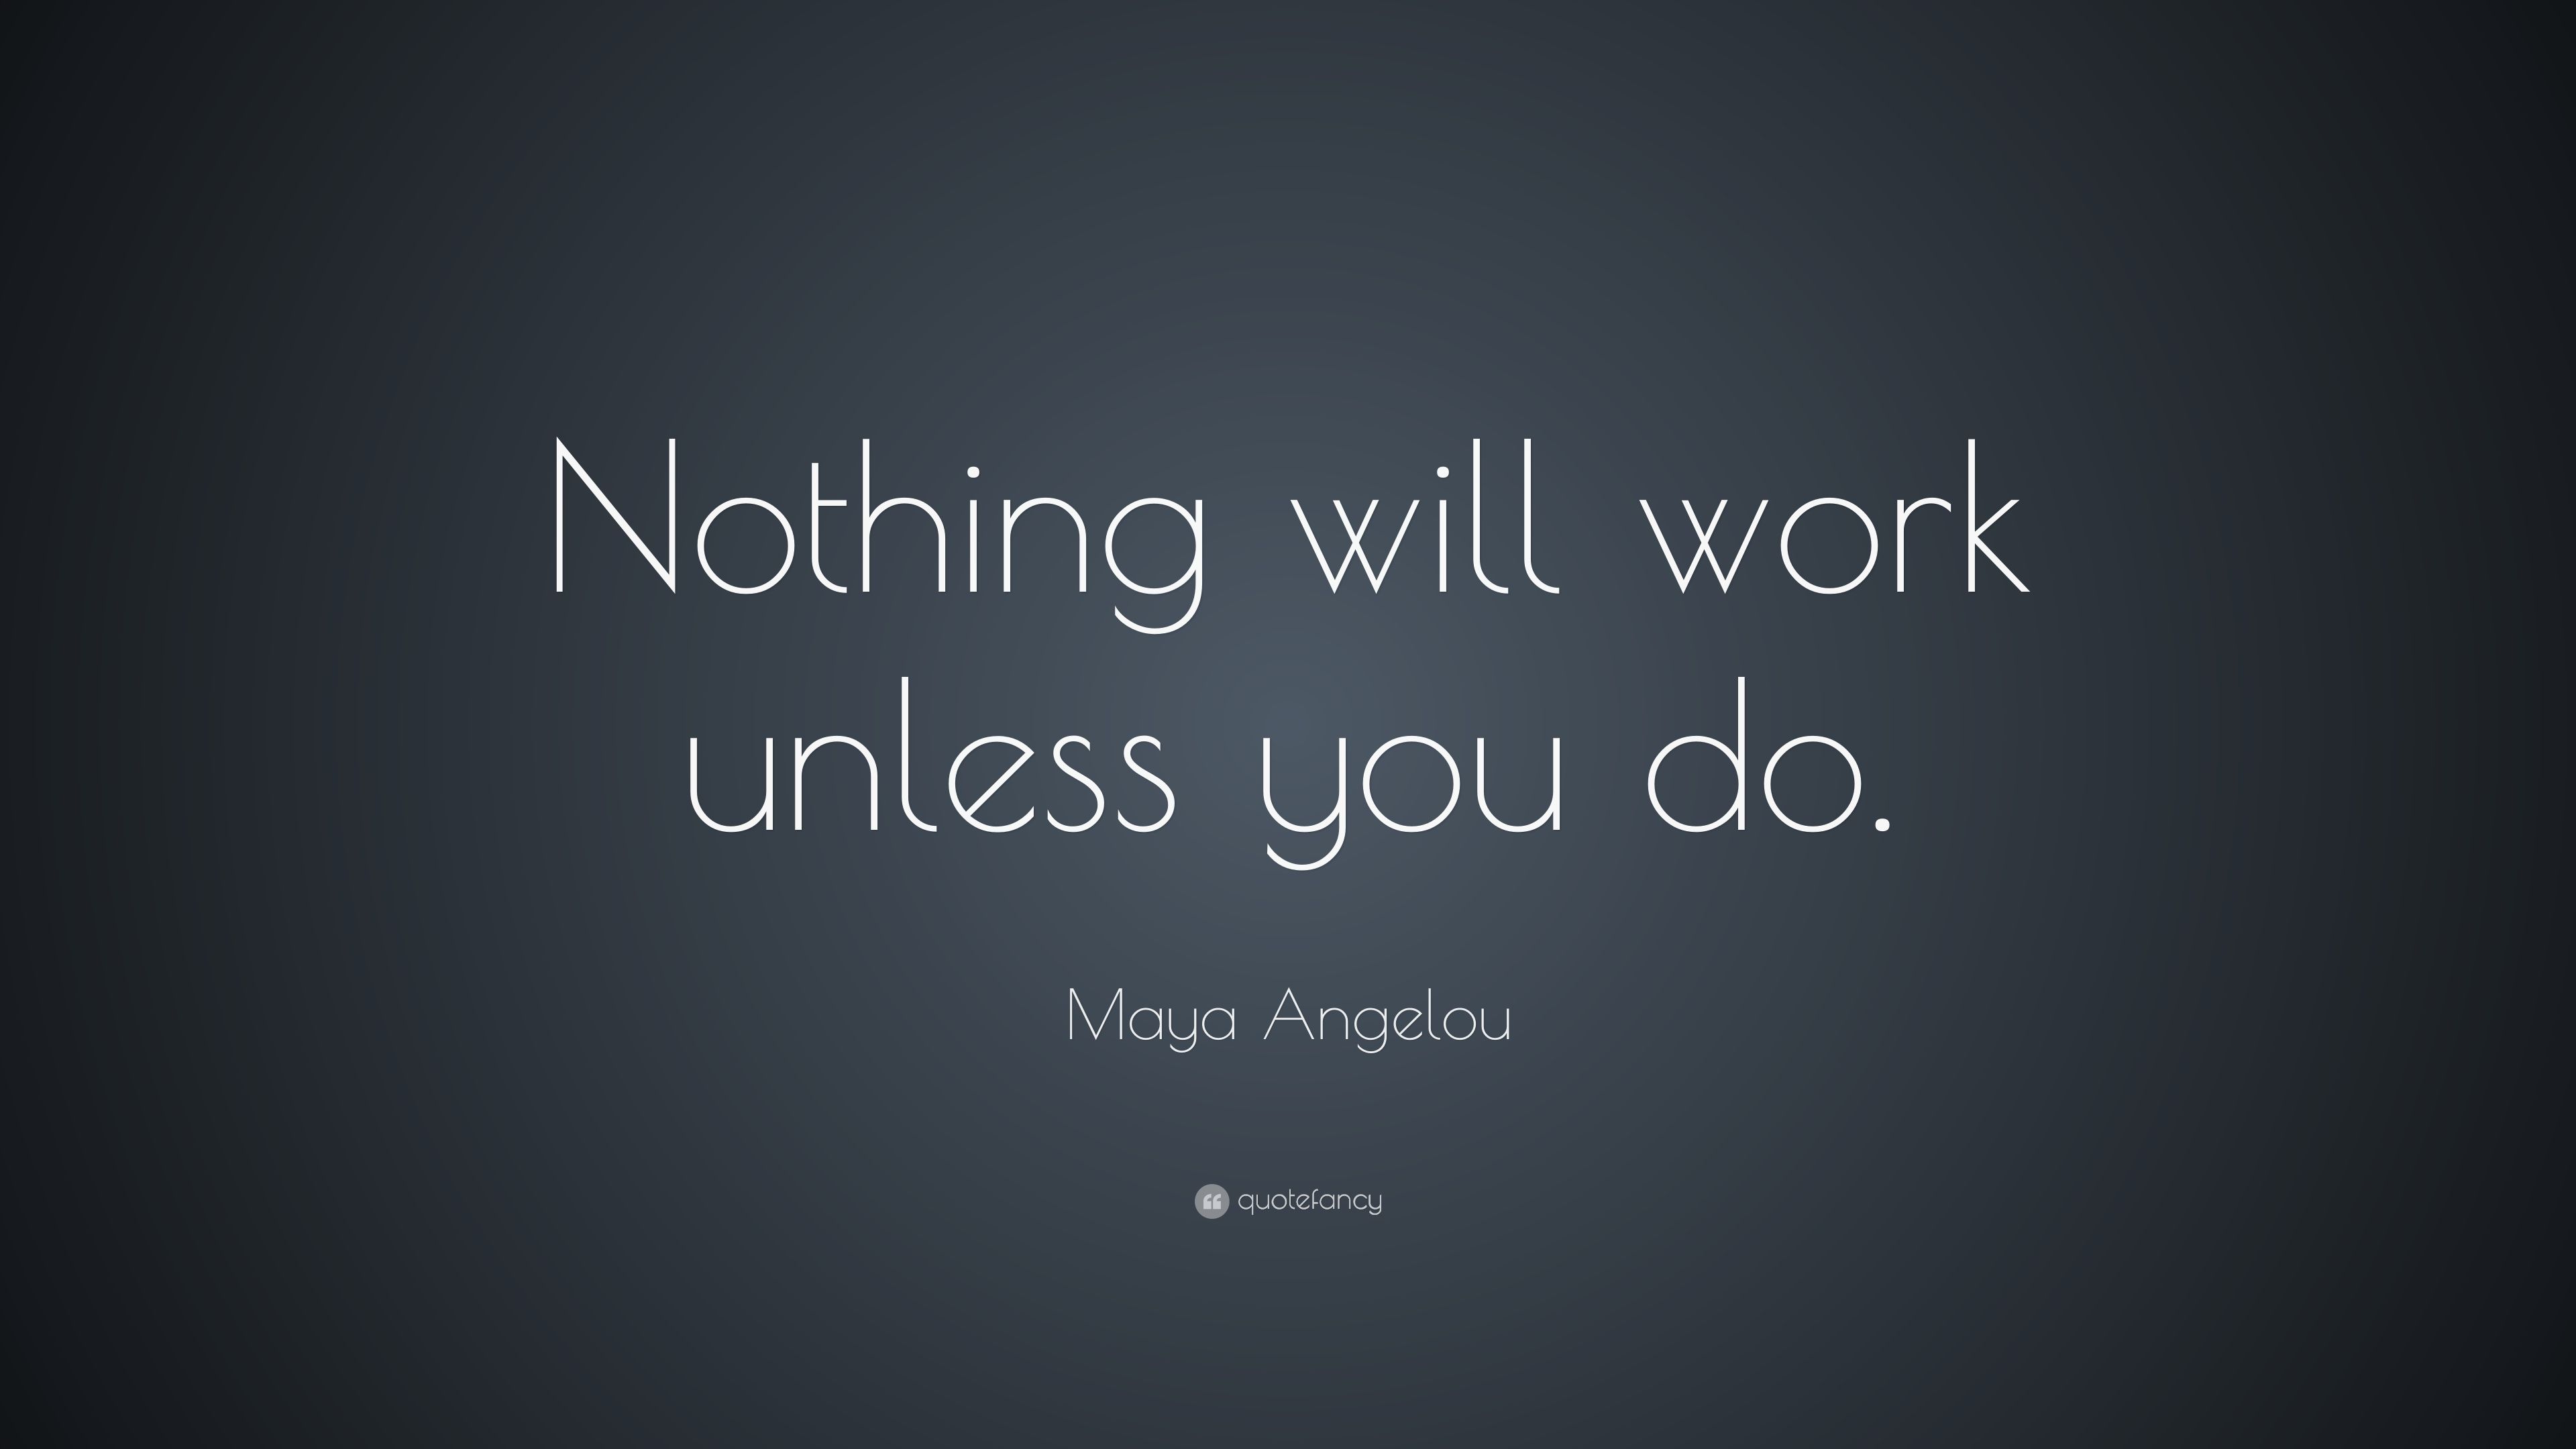 Maya Angelou Quote: “Nothing will work .quotefancy.com